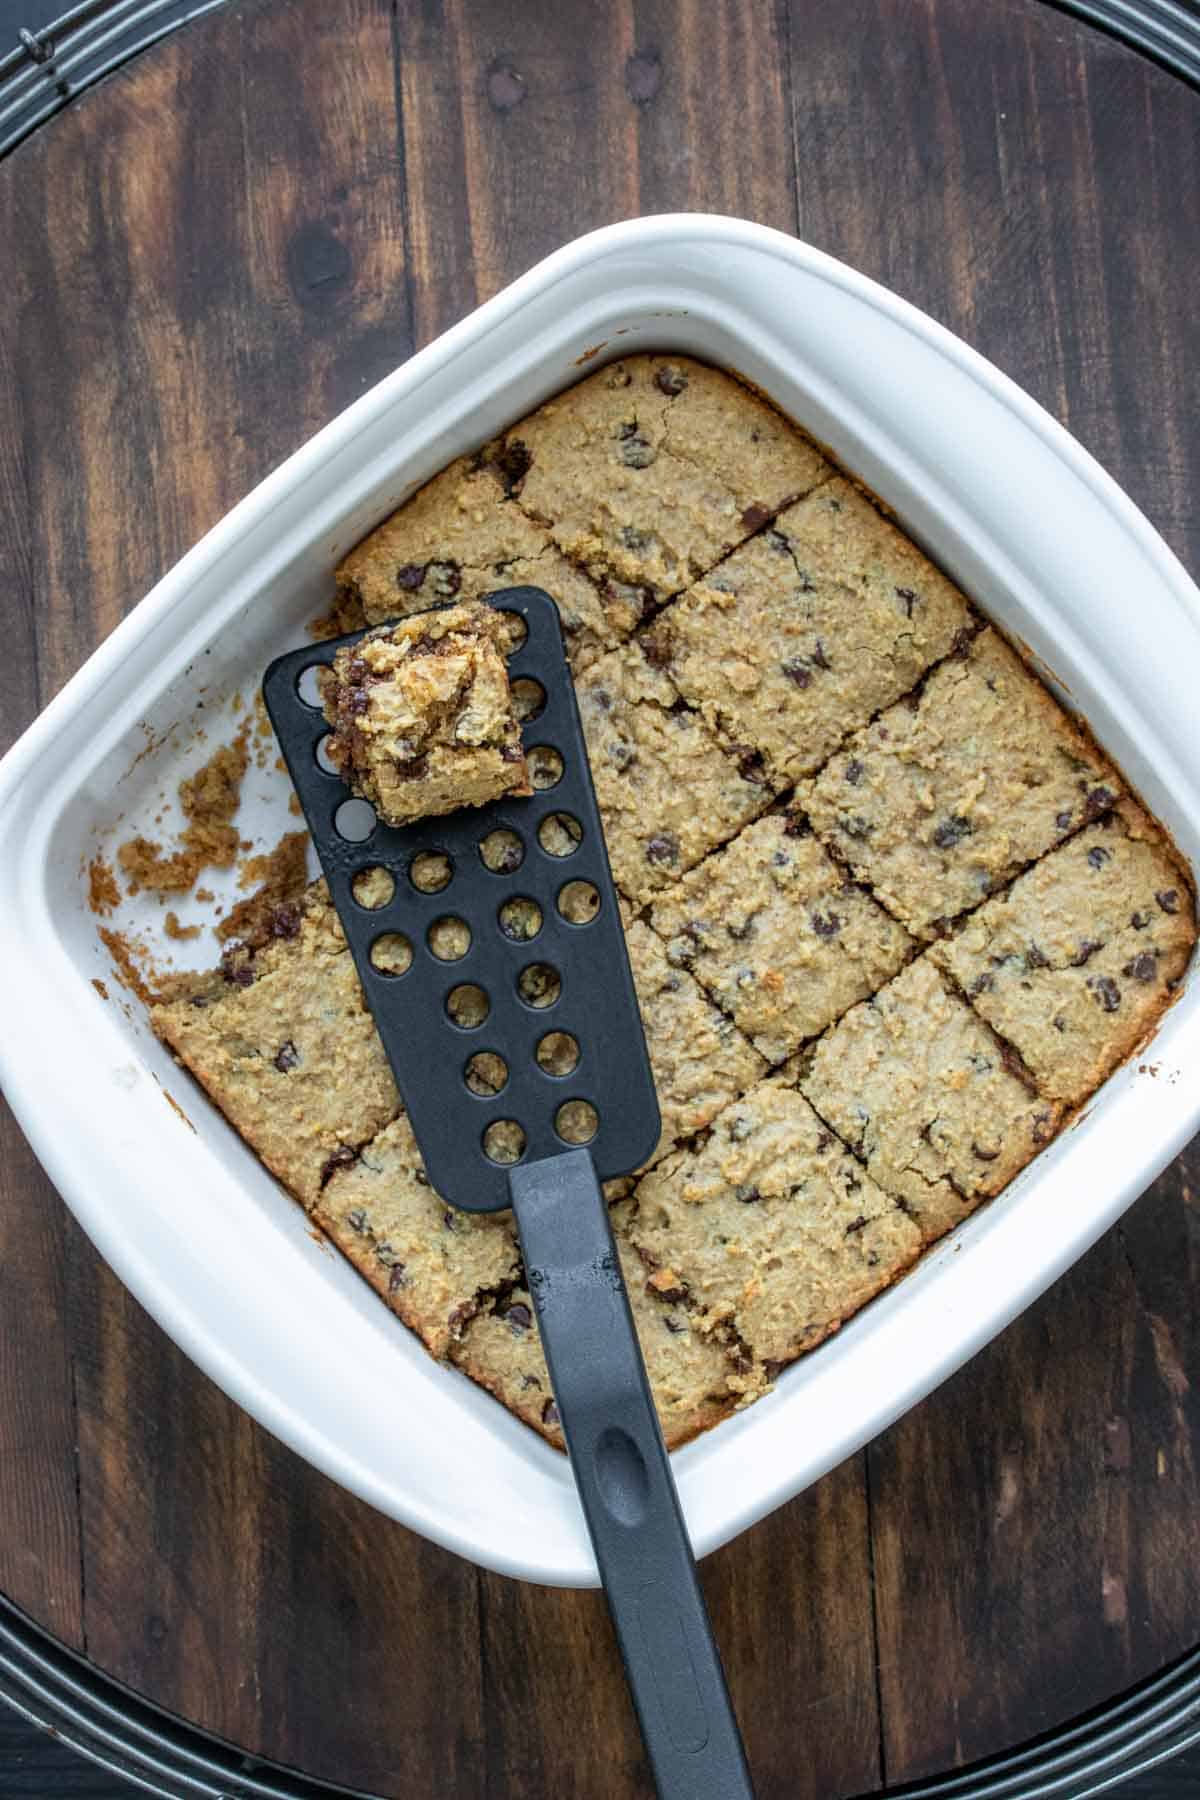 Black spatula taking a blondie piece from a white baking dish